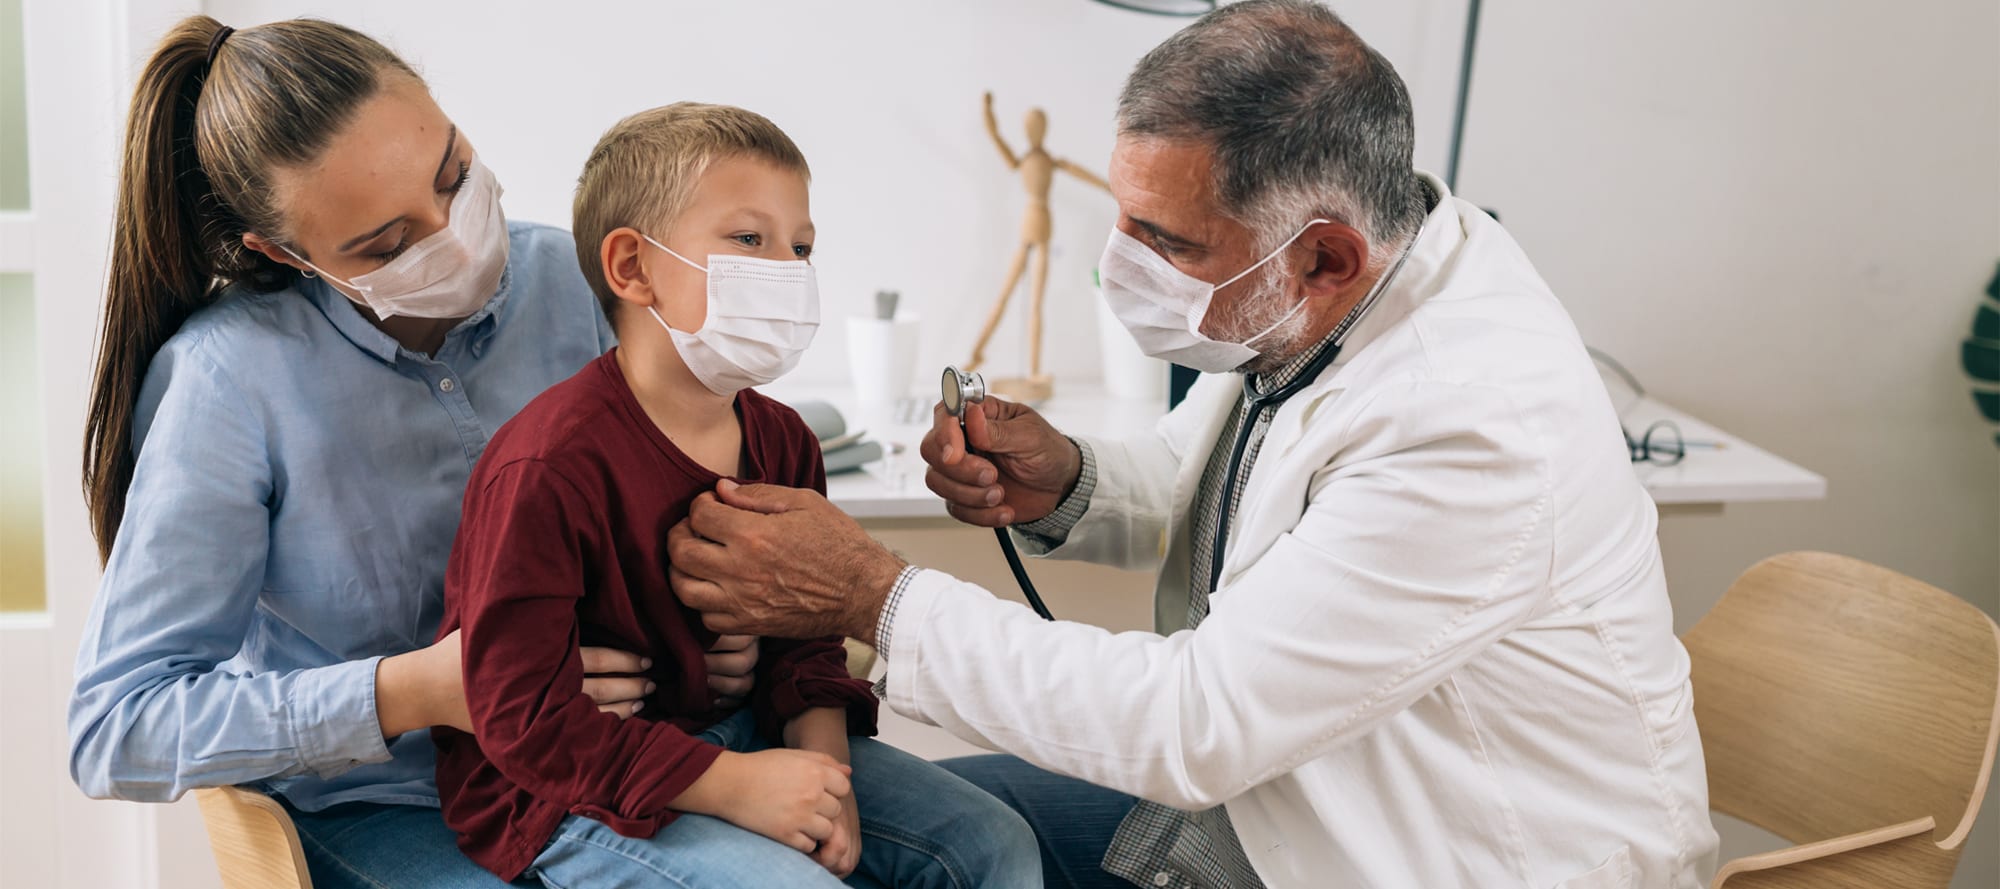 Doctor evaluating health of child